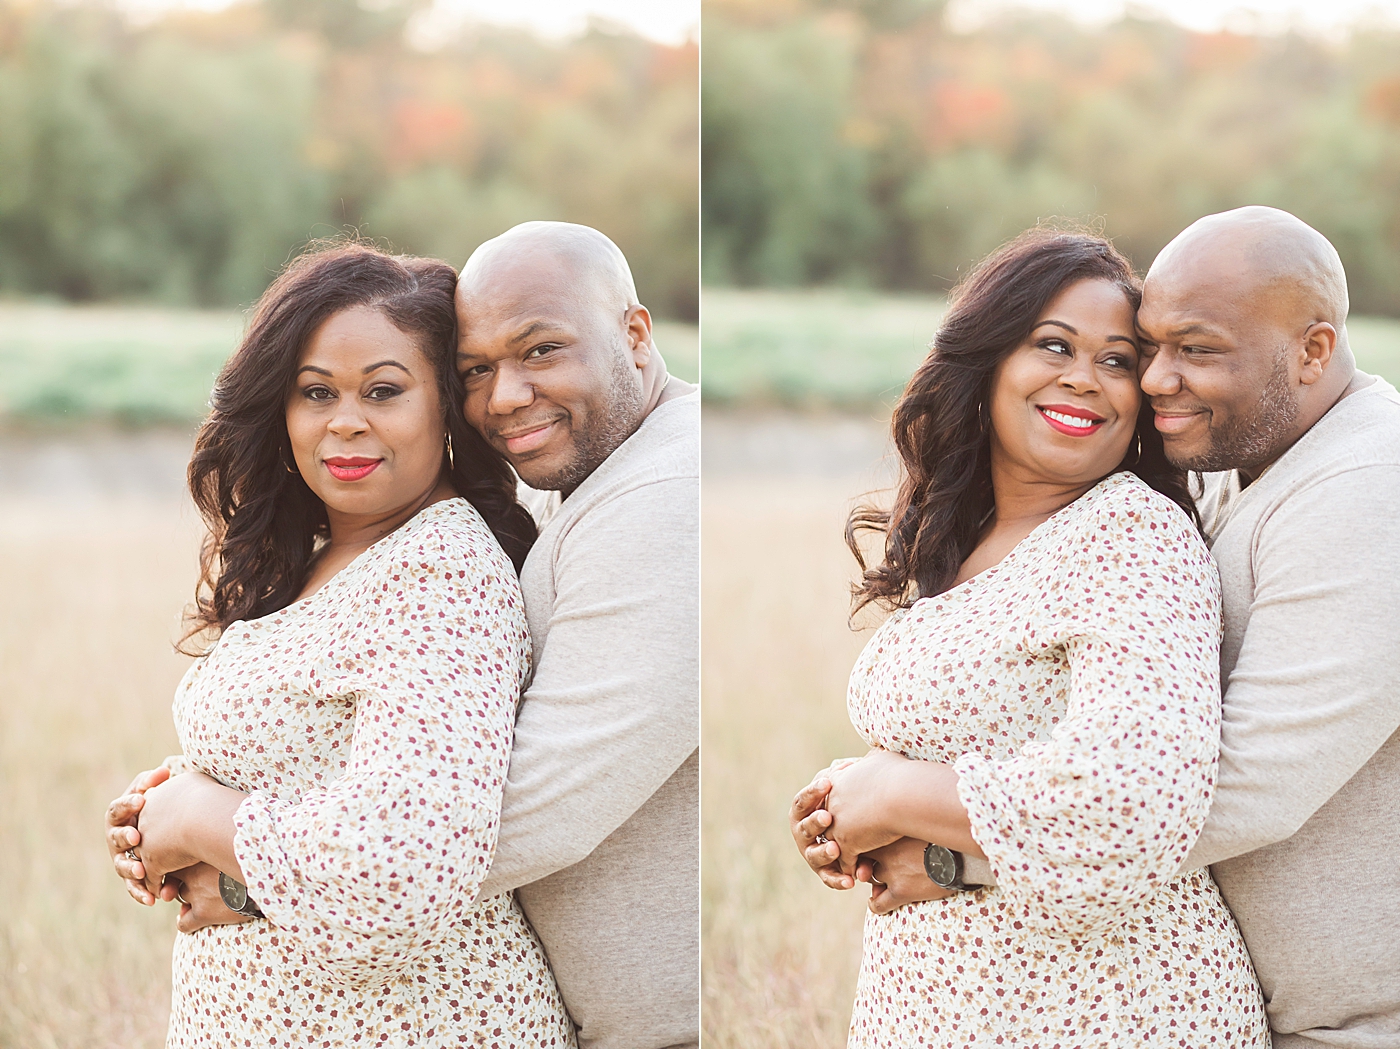 Mom and Dad pose for a photo together during fall family session. Photo by Fresh Light Photography.